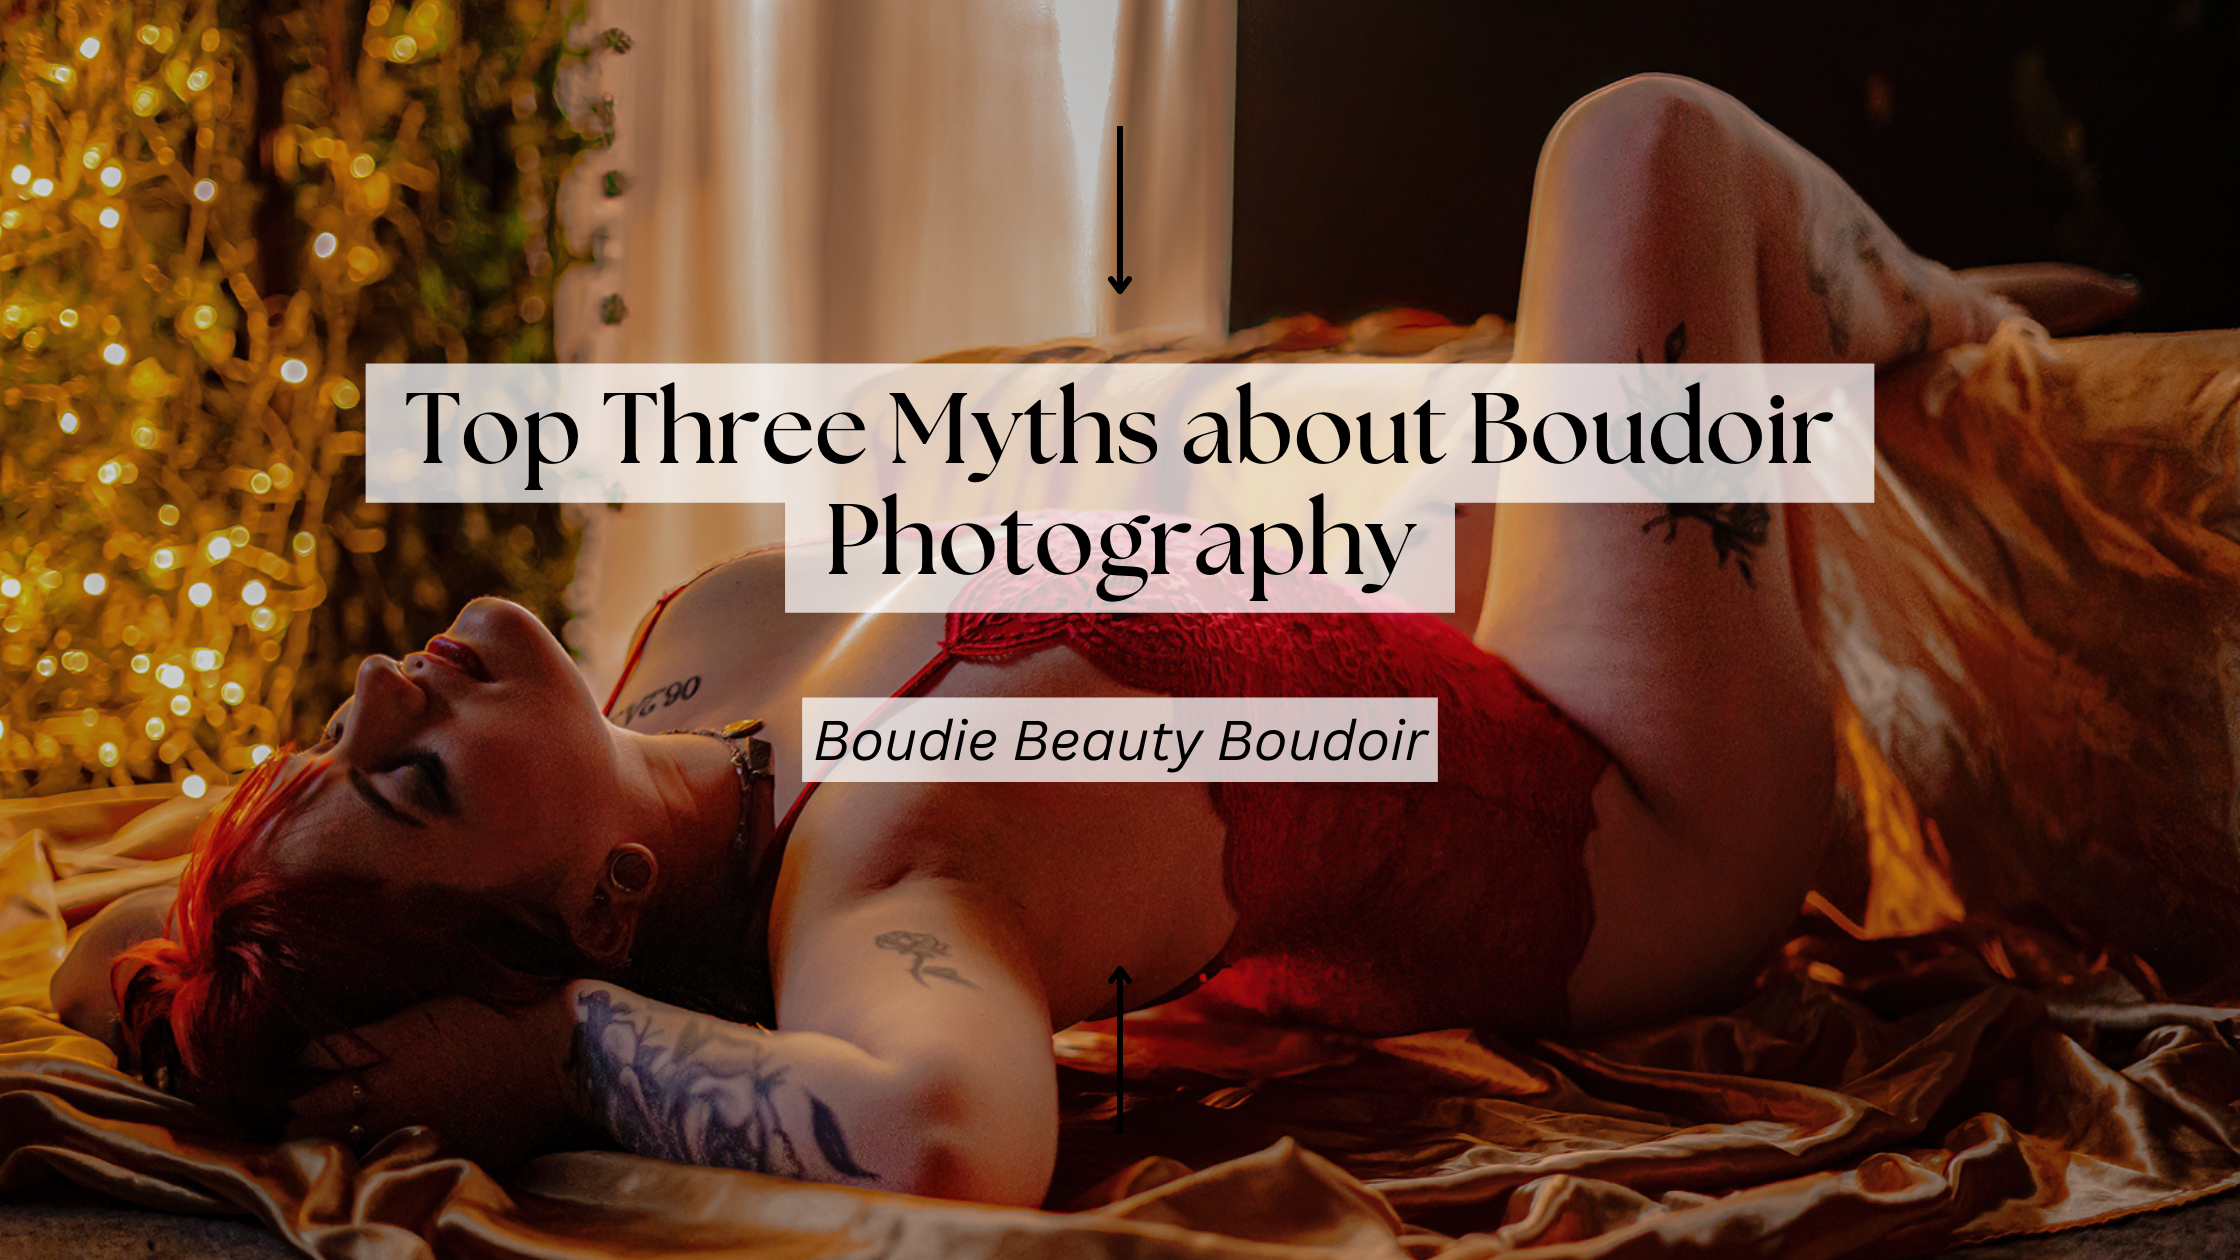 3 Reasons why you shouldnt book a boudoir shoot written by Kayleigh a female boudoir photographer and owner of boudie beauty boudoir photography located in gloucester, ma empowering women in boston and new england